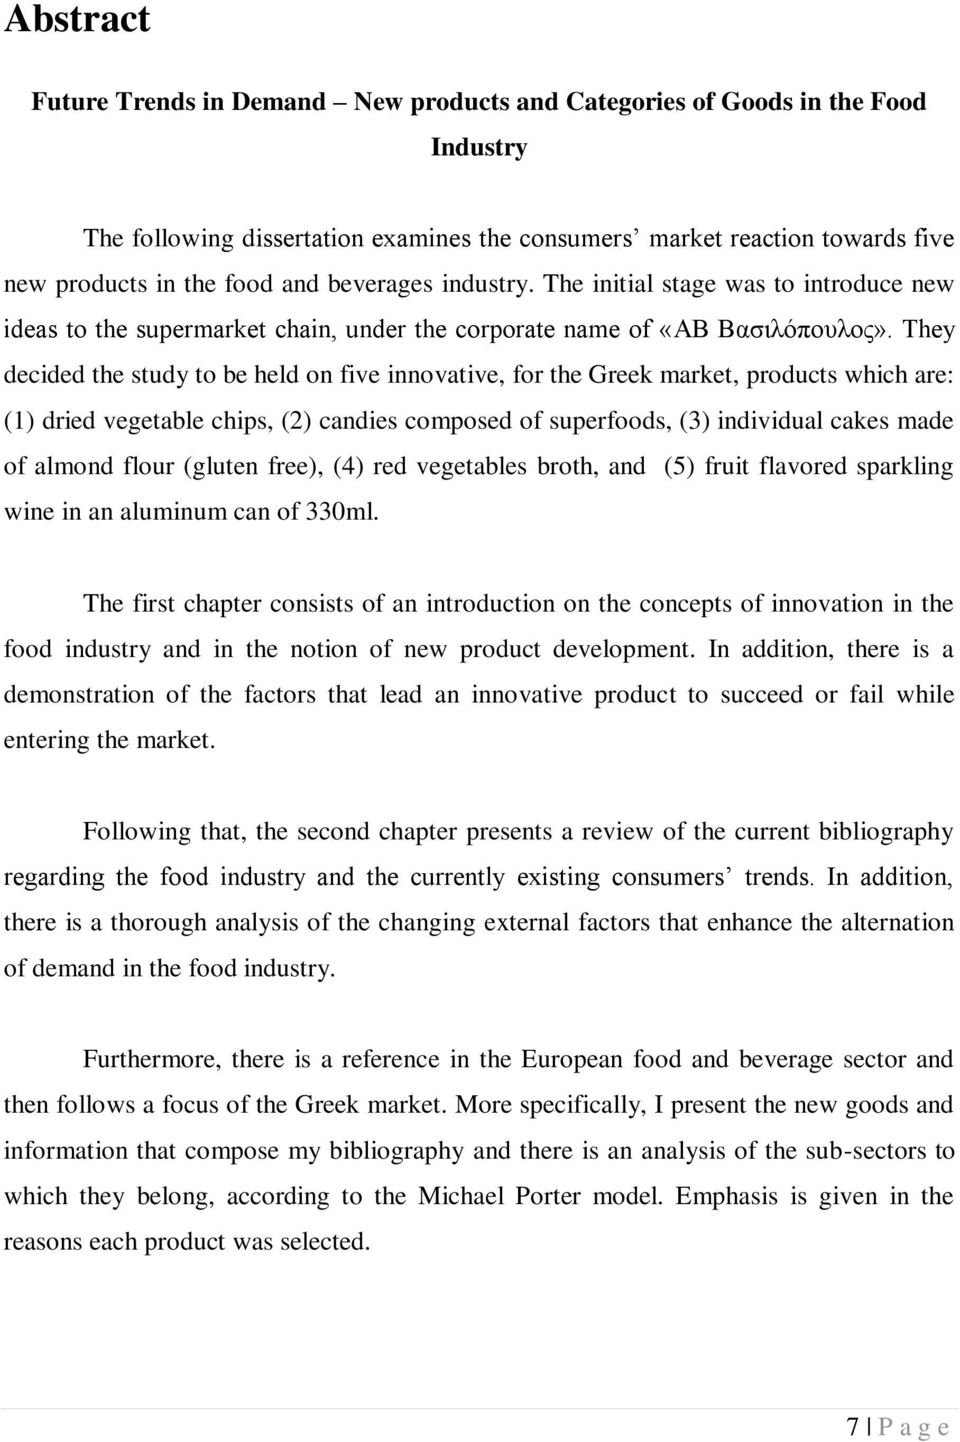 They decided the study to be held on five innovative, for the Greek market, products which are: (1) dried vegetable chips, (2) candies composed of superfoods, (3) individual cakes made of almond